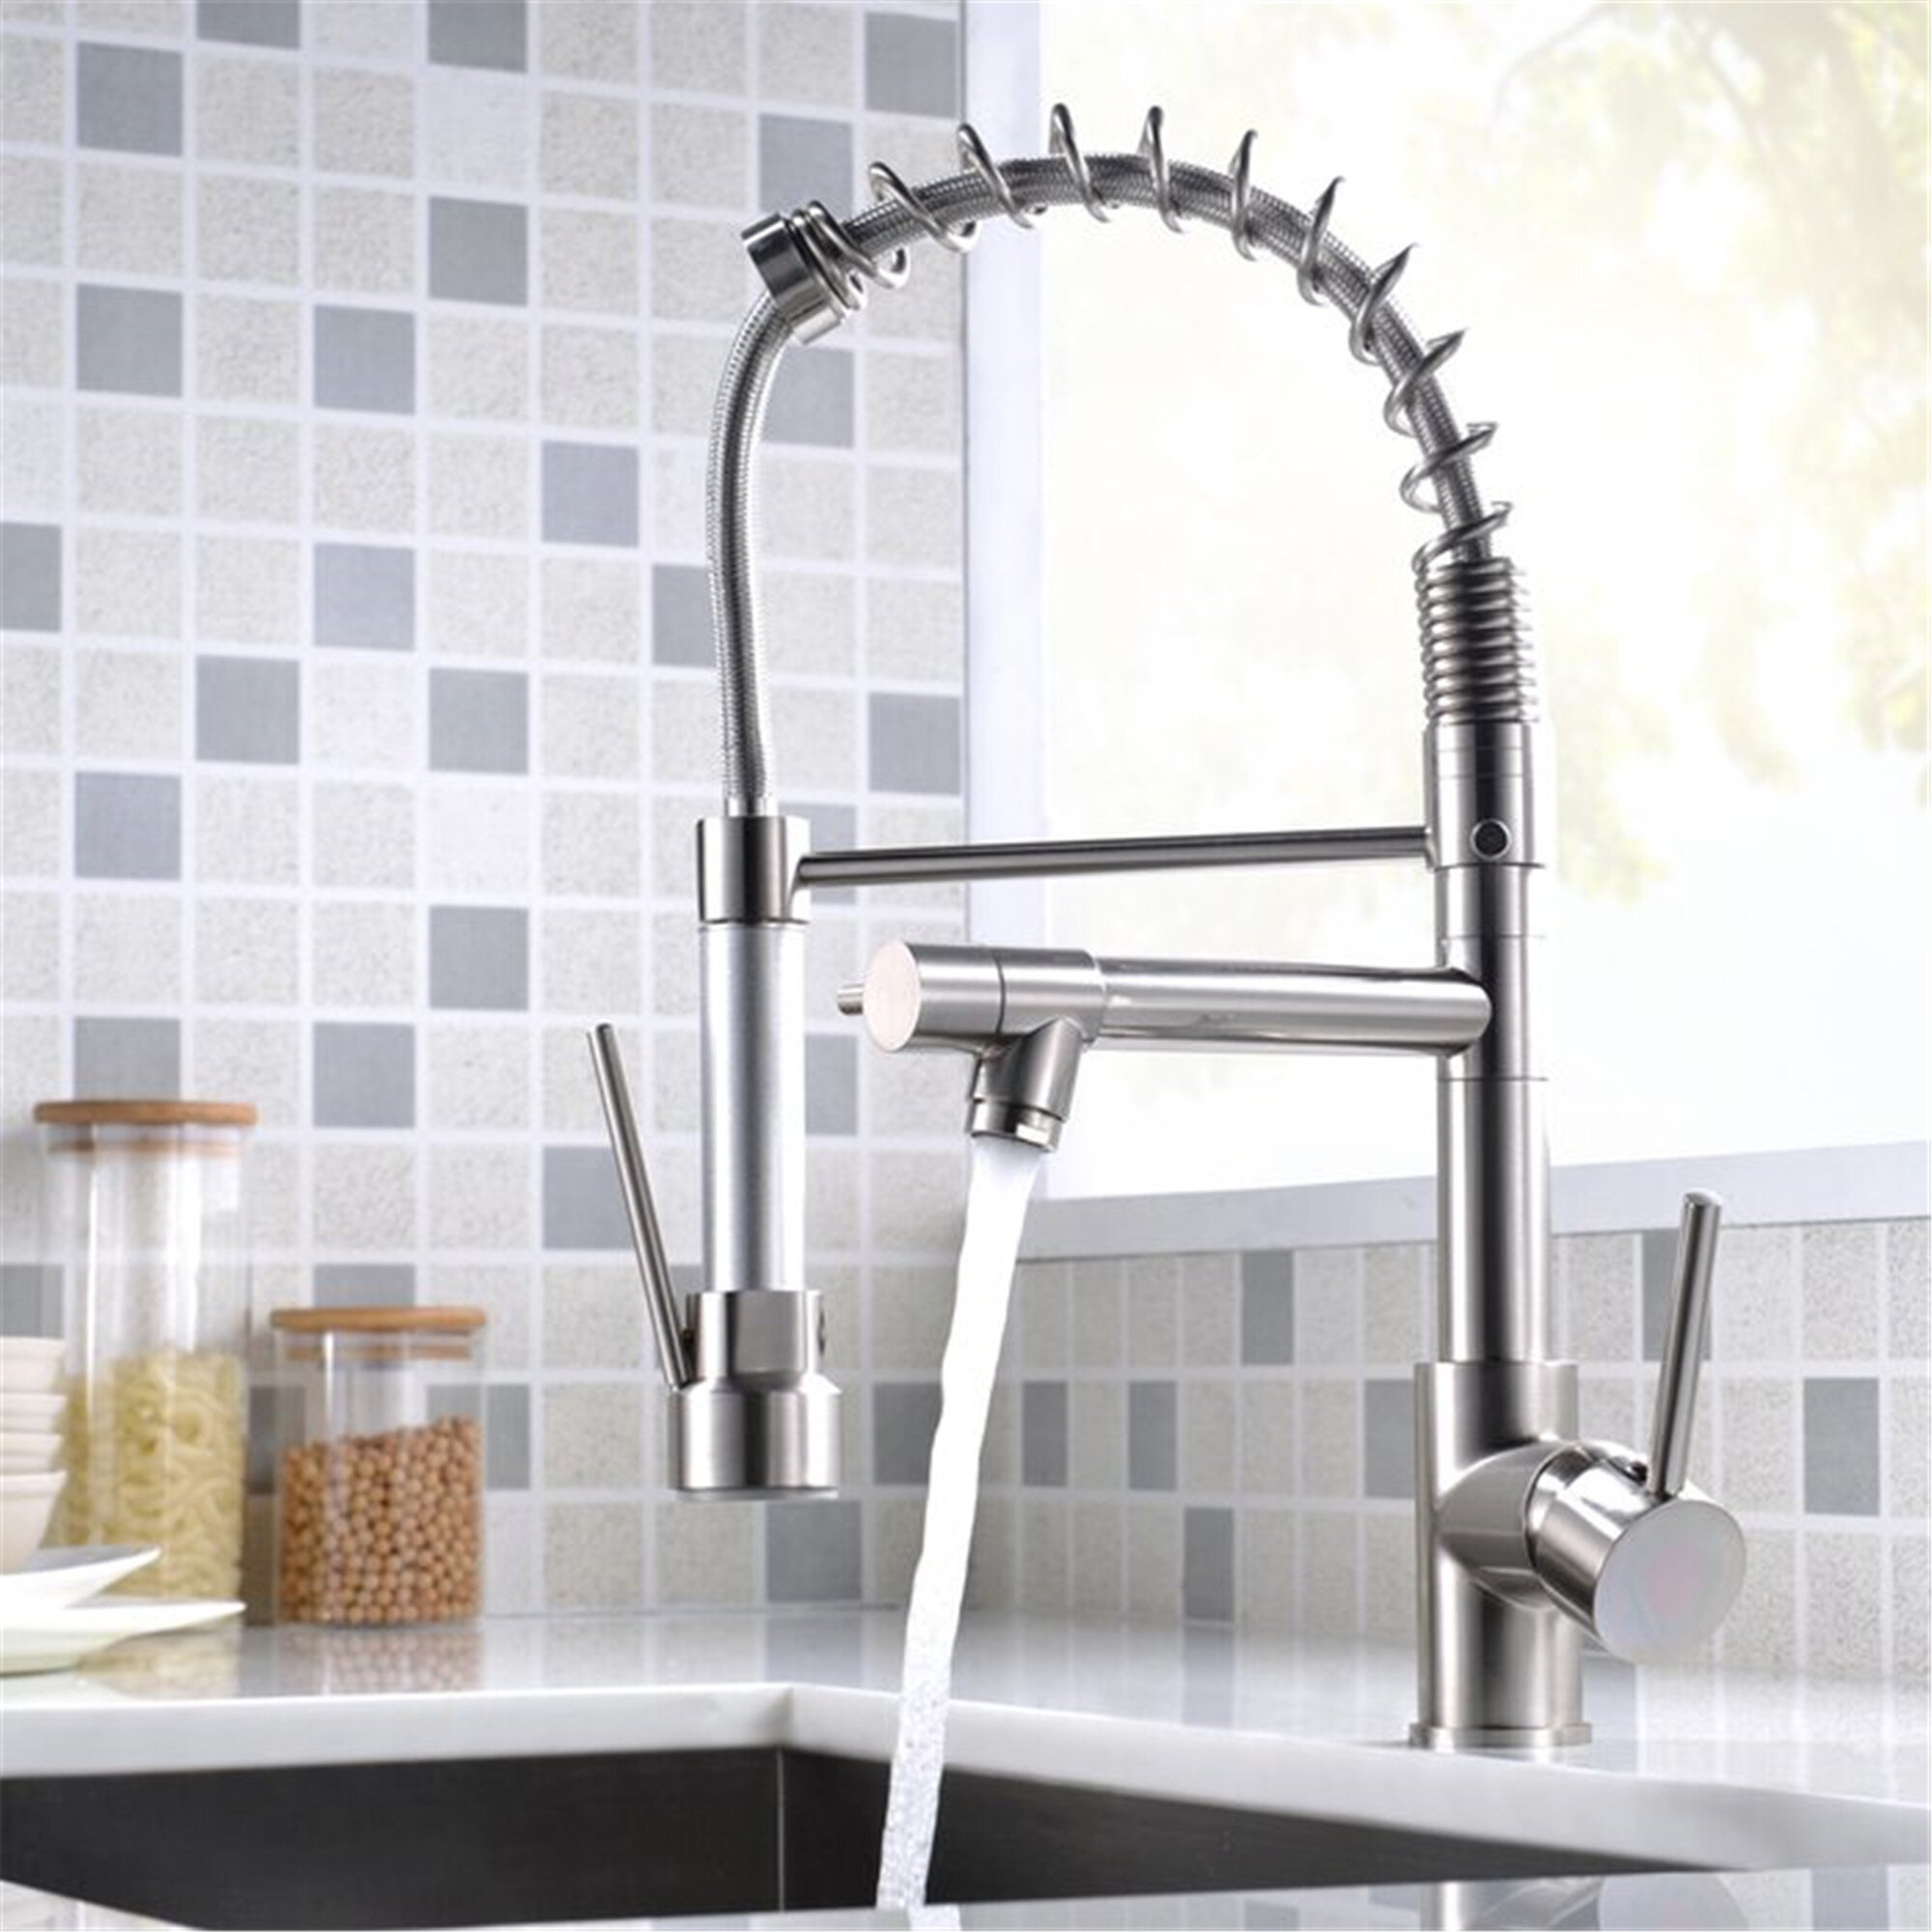 Pre-Rinse Spray Head Valve Faucet Water Saving Taps Commercial Kitchen Spray Tap 